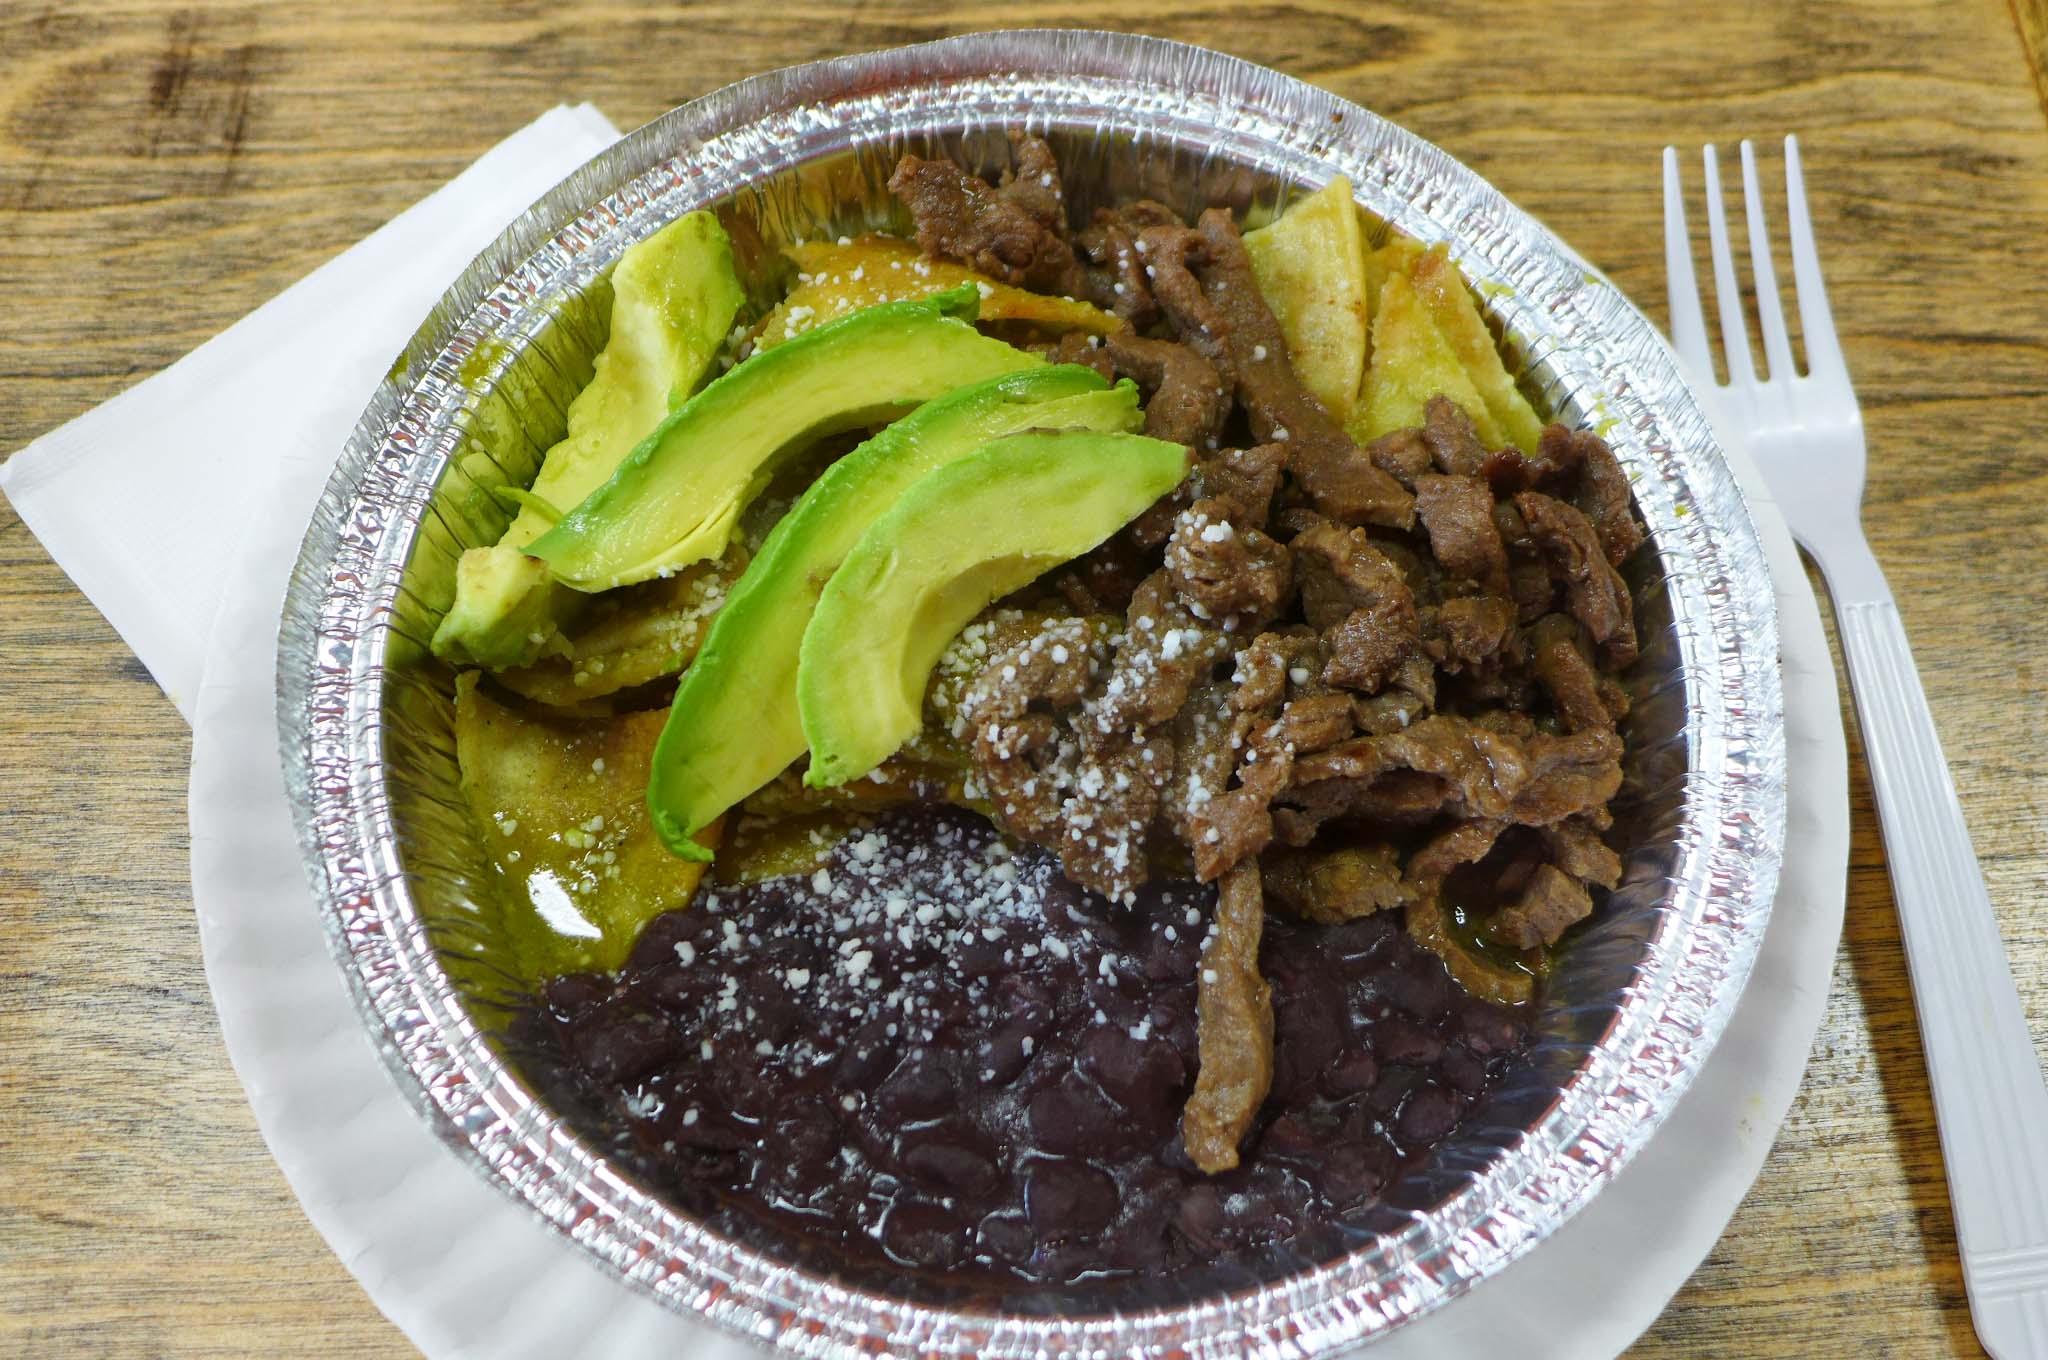 A round aluminum container with shreds of steak, beans, avocados and a few tortilla chips seen.